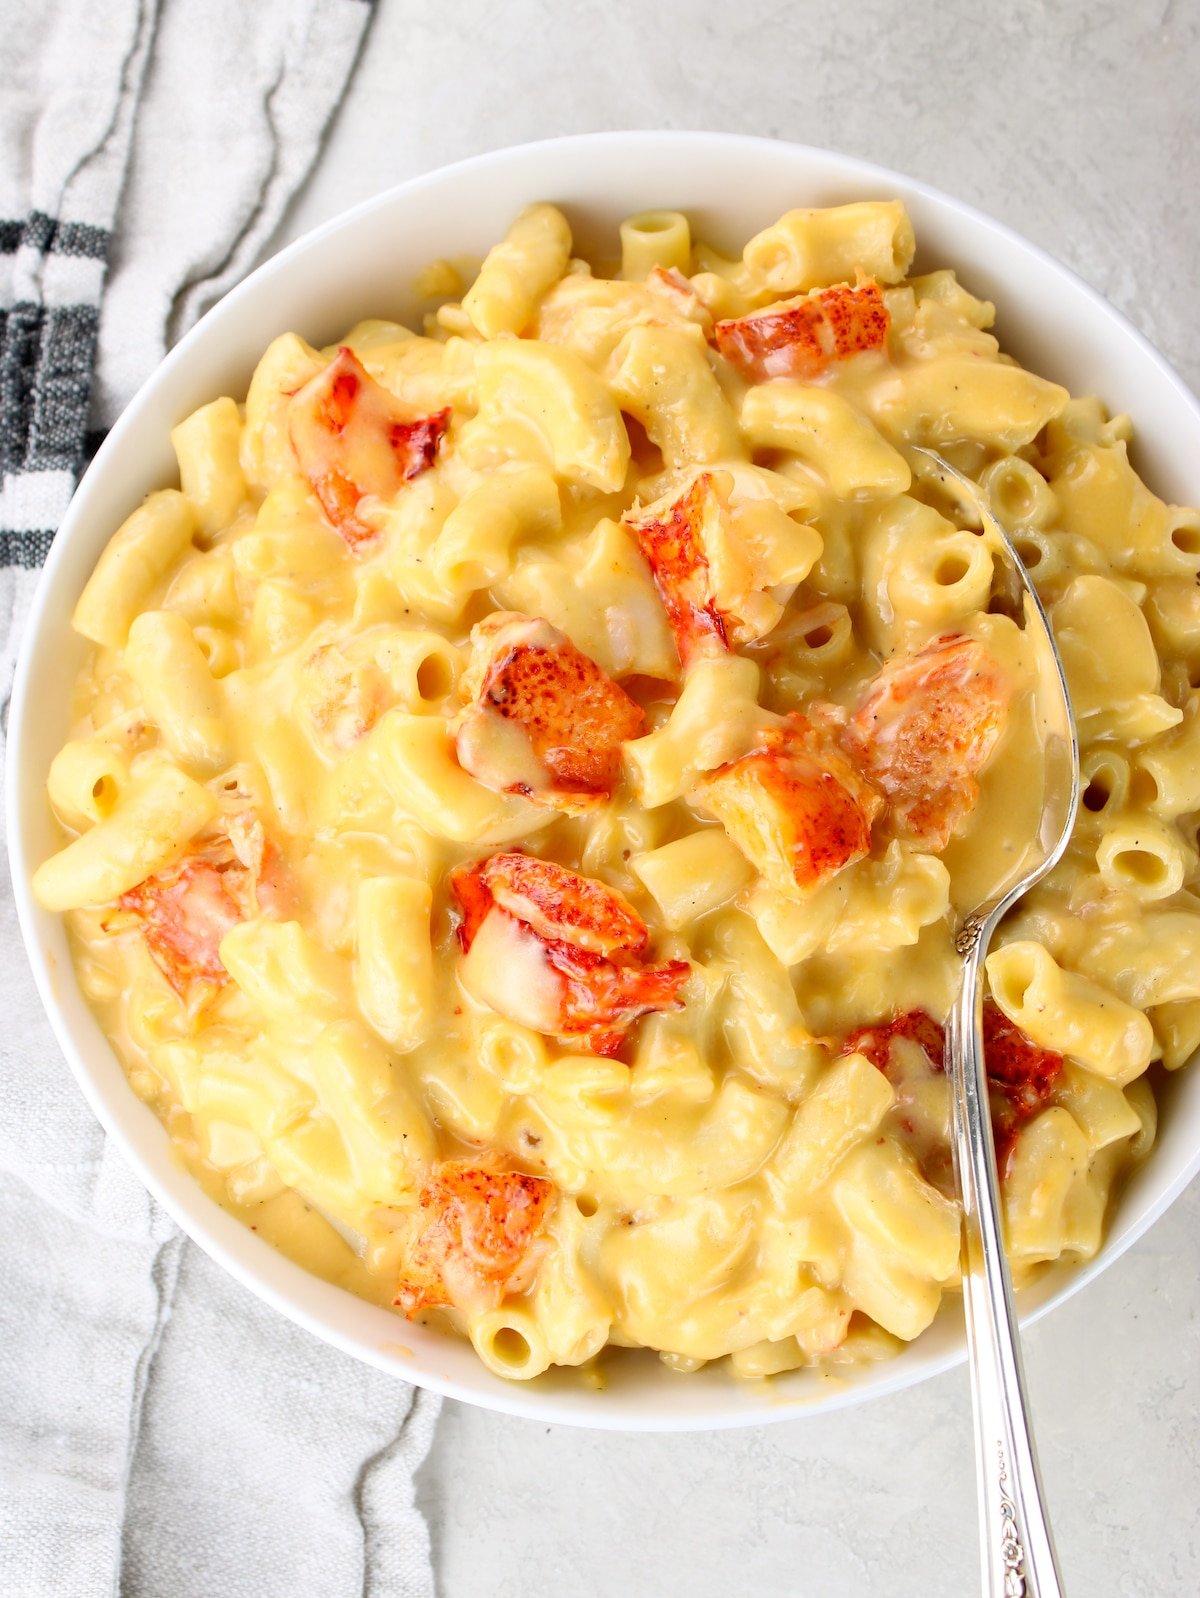 A close-up photo of melted cheese, macaroni, and lobster meat.